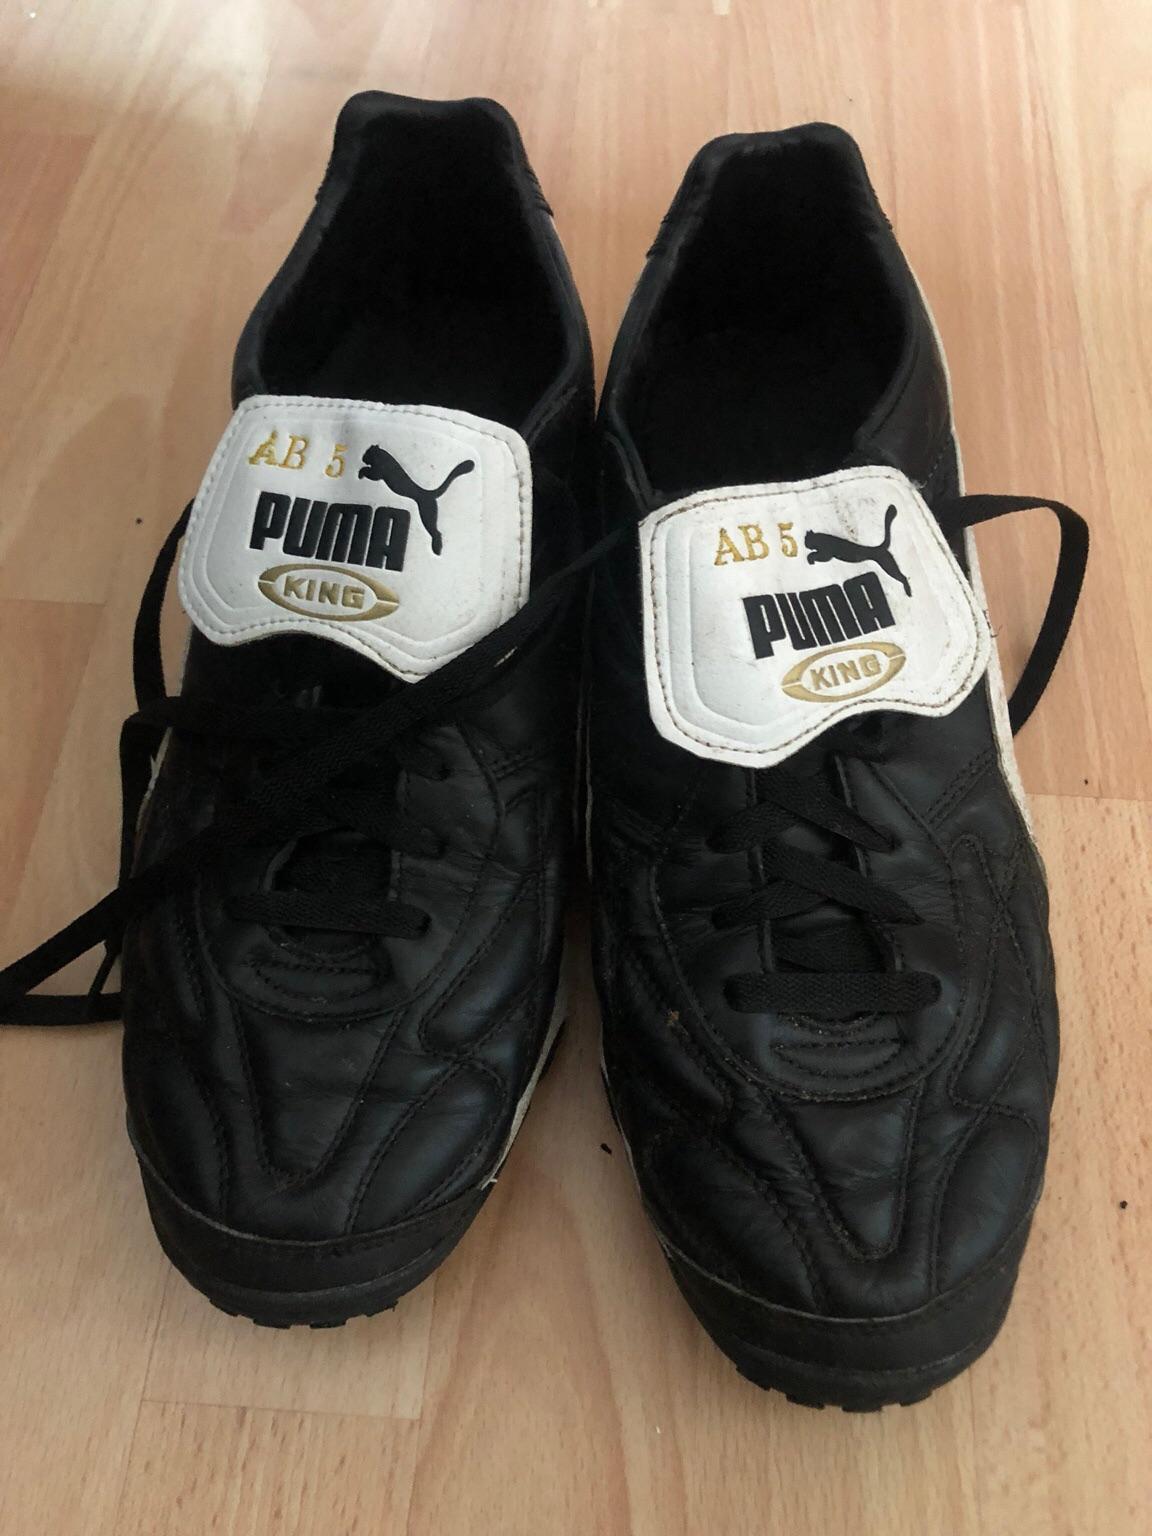 Puma King Astro trainers in SL6 Maidenhead for £30.00 for sale | Shpock